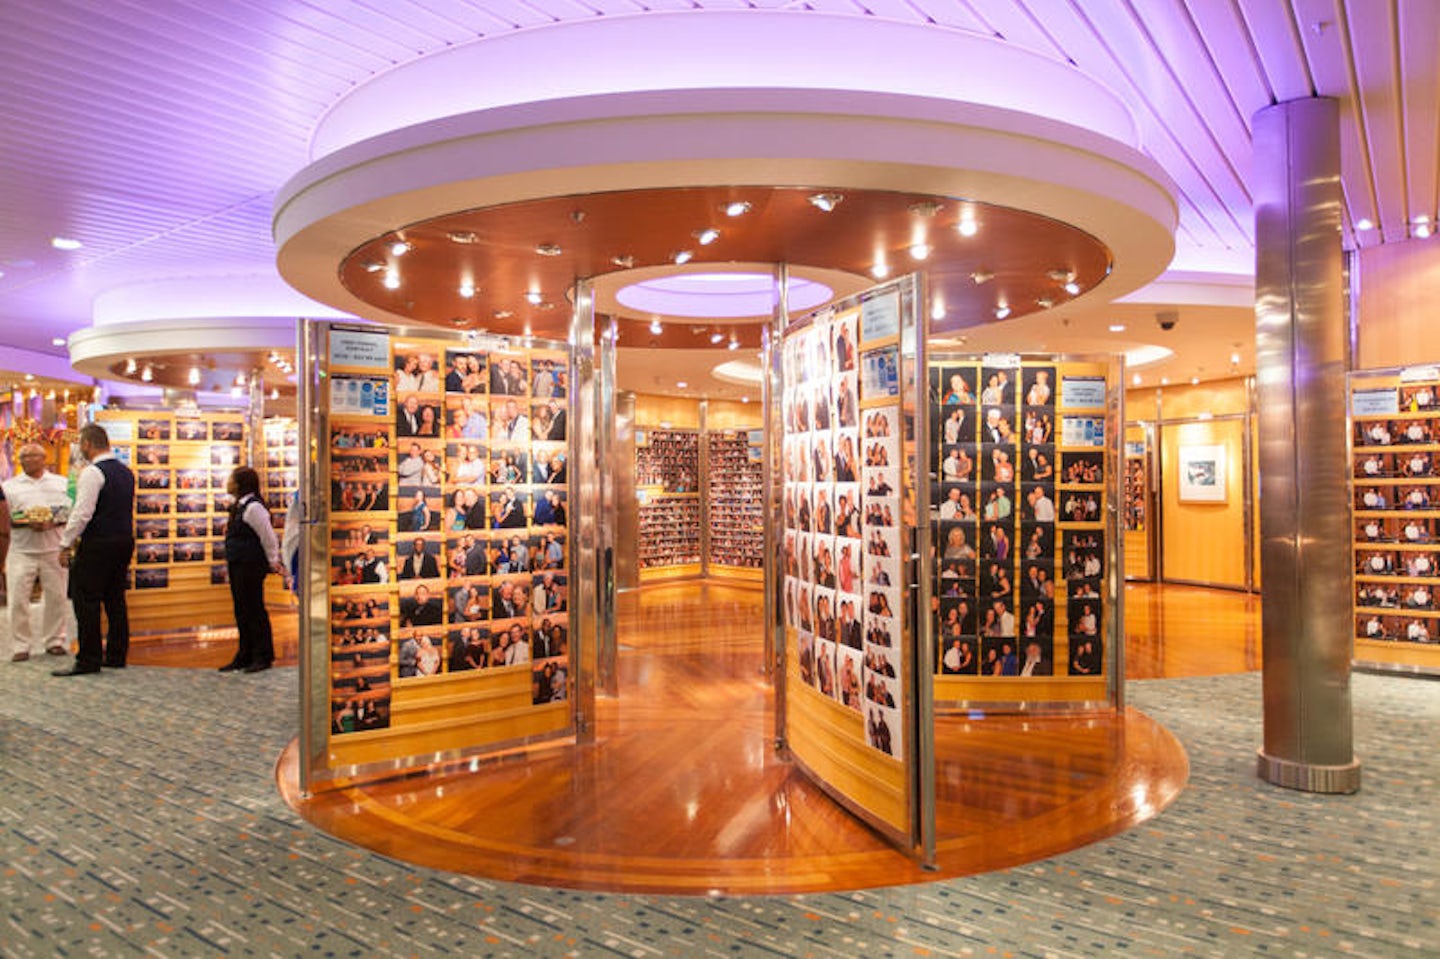 Photo Gallery on Independence of the Seas